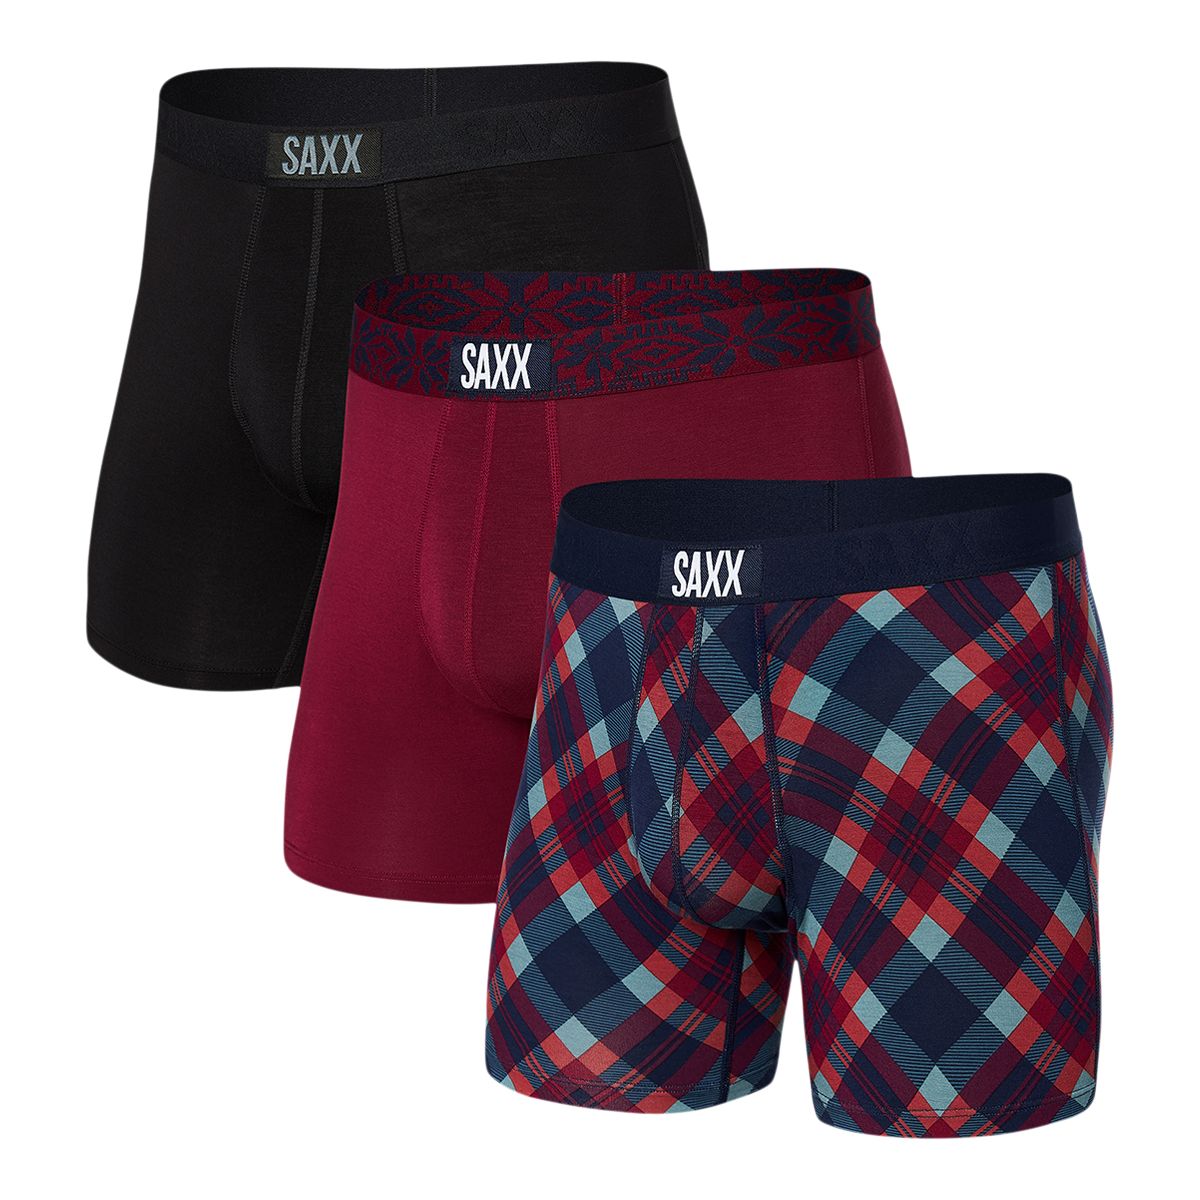 https://media-www.sportchek.ca/product/div-03-softgoods/dpt-79-clothing-accessories/sdpt-01-mens/334186934/saxx-vibe-holiday-gift-box-bb-3pk-1023-red-aop-ecdcc84f-ced6-4ae5-a10c-66f9e02e8b66-jpgrendition.jpg